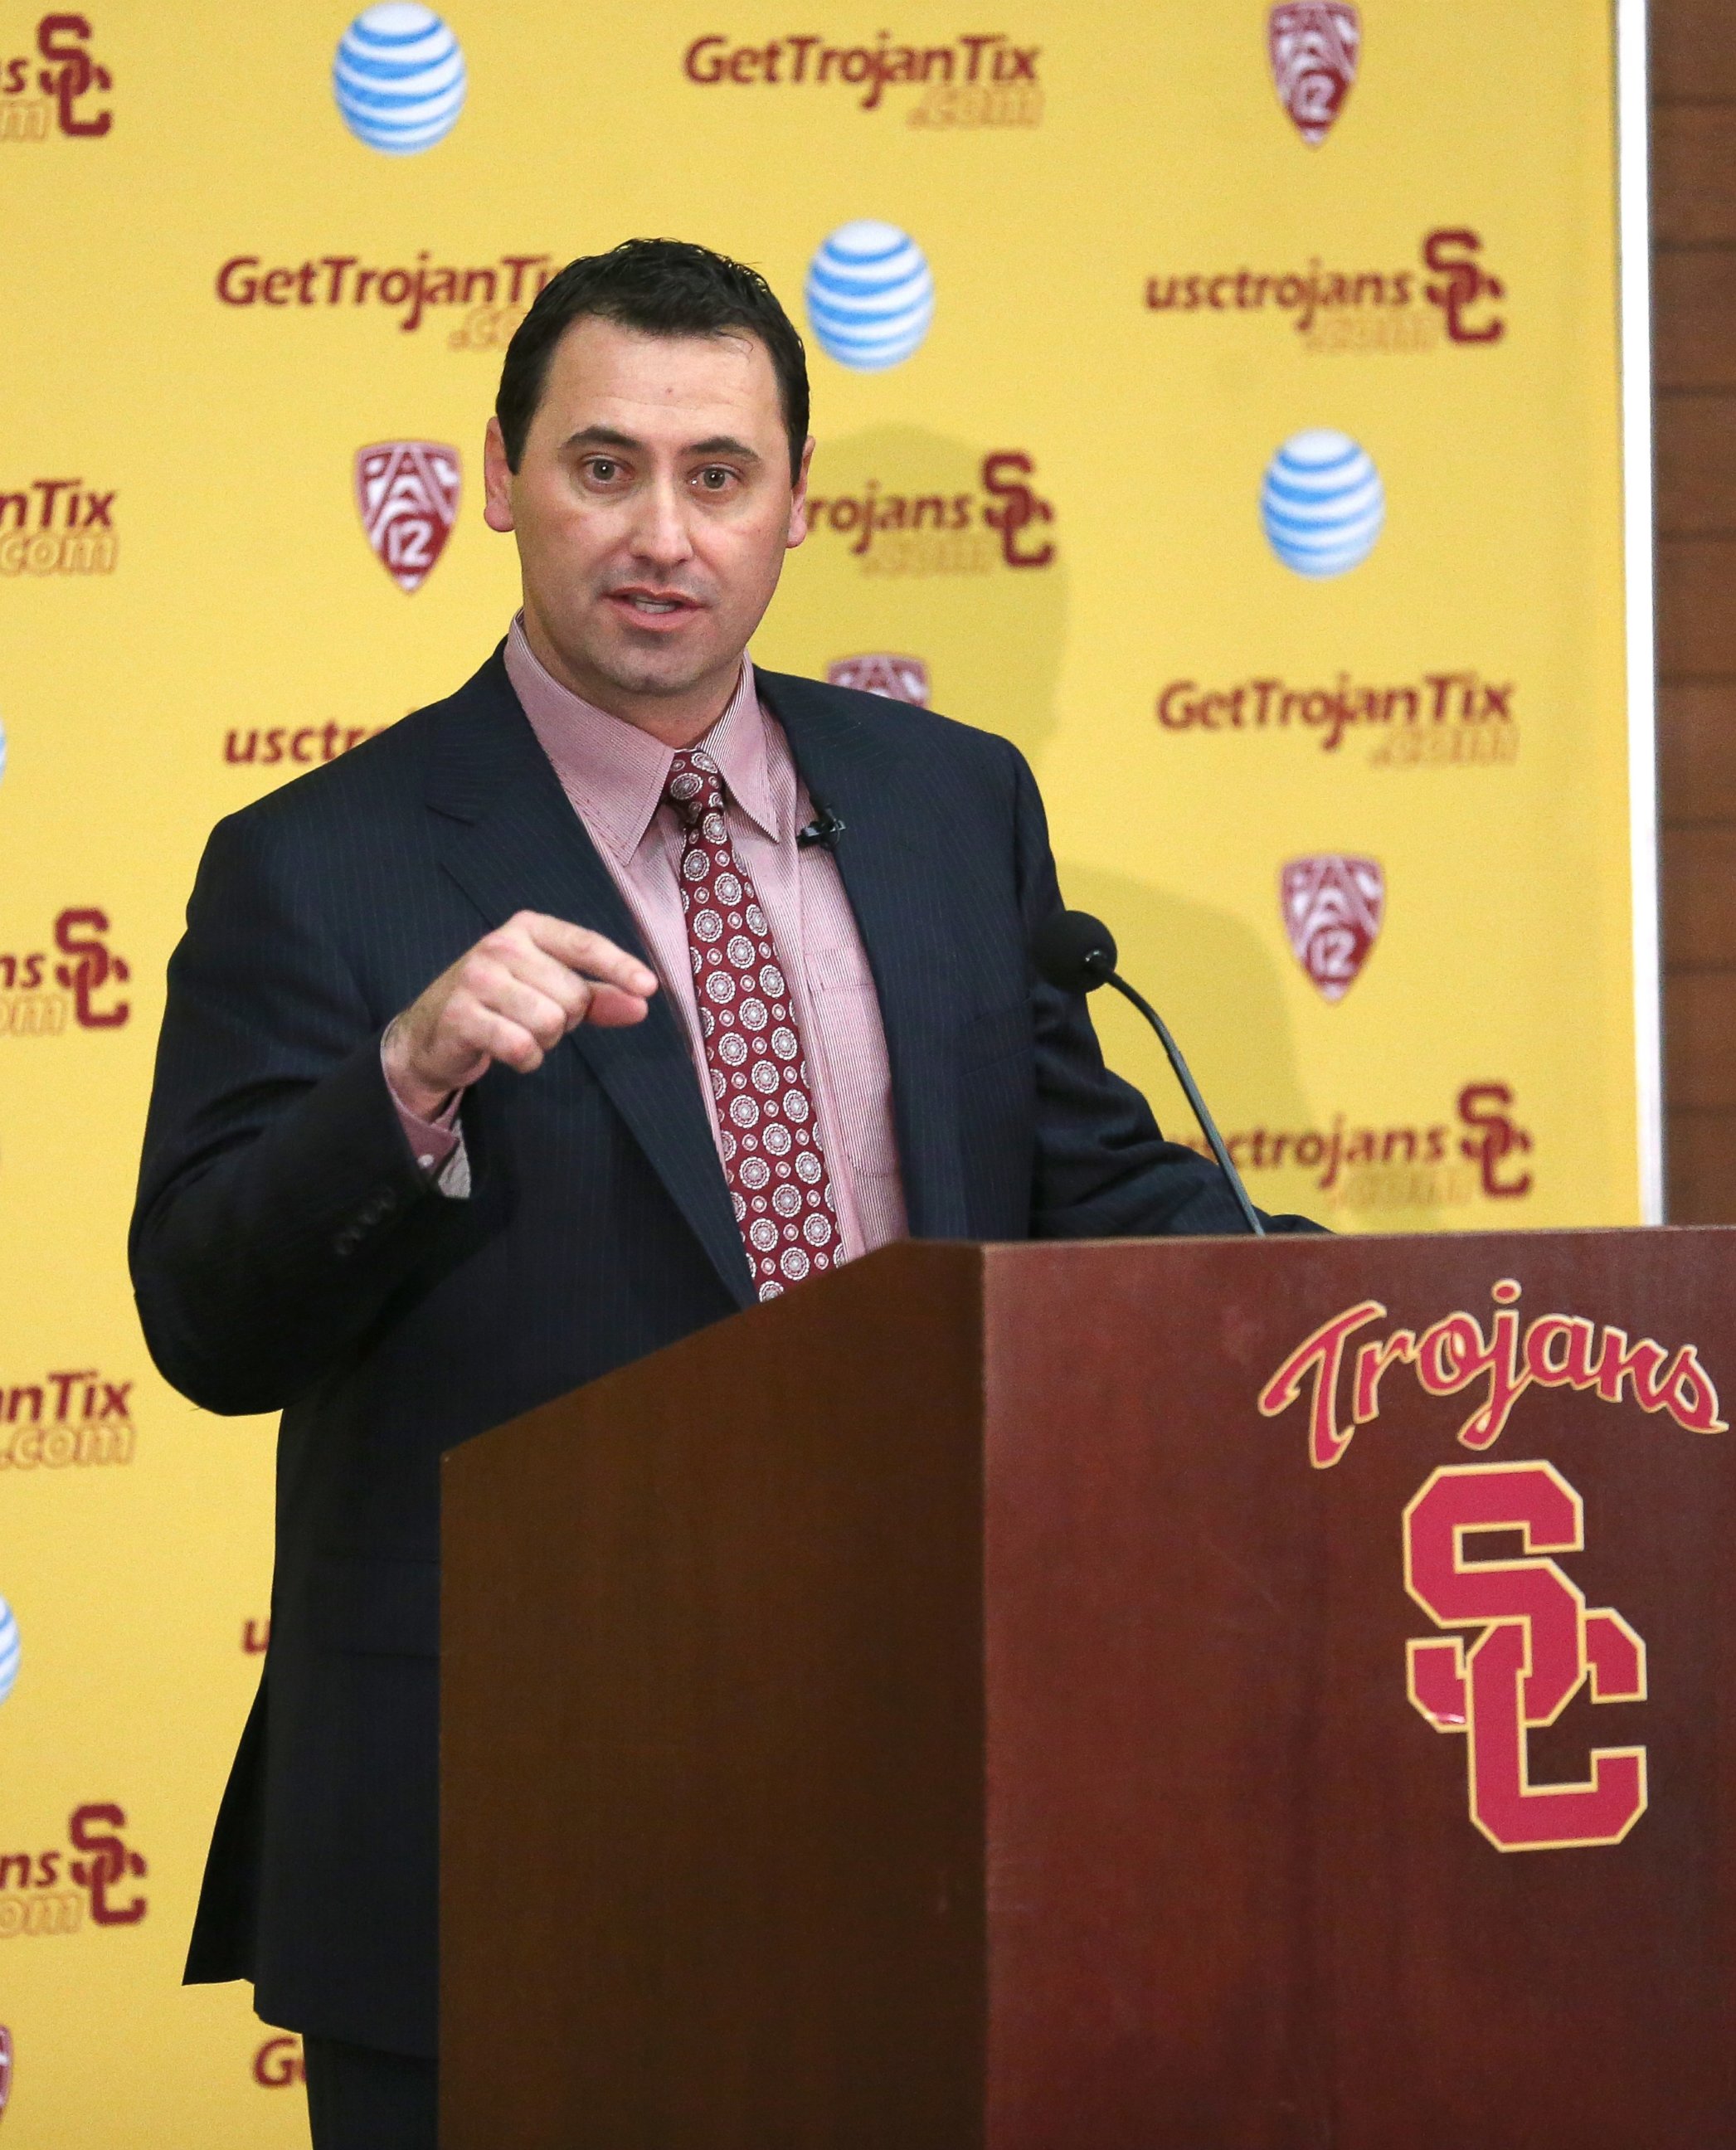 PHOTO: Steve Sarkisian speaks at a press conference at the John McKay Center at the University of Southern California on Dec. 3, 2013 in Los Angeles, Calif.